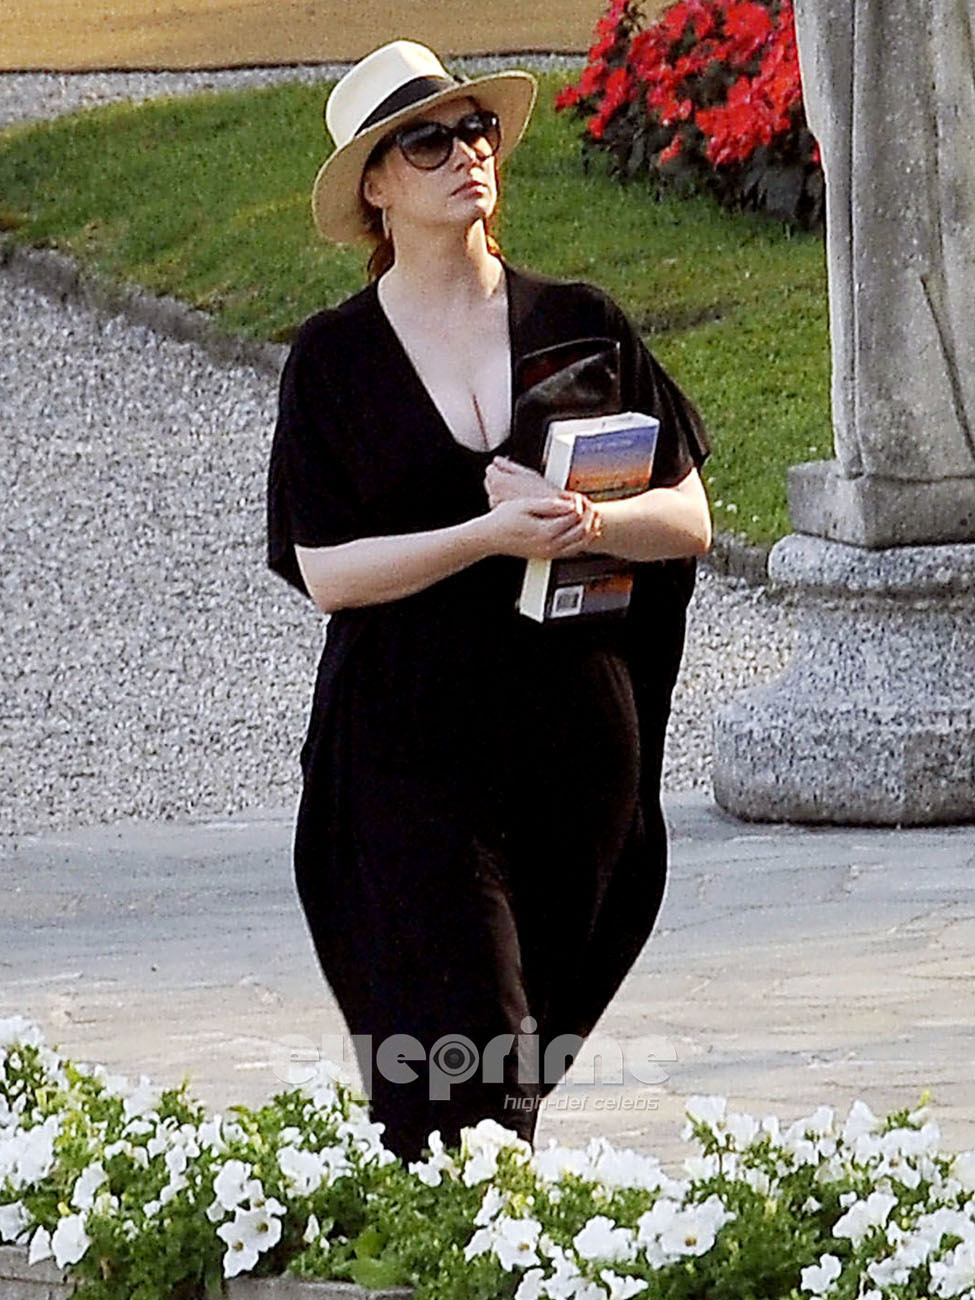 Christina Hendricks relaxing by the Hotel Pool in Lake Como, Italy.